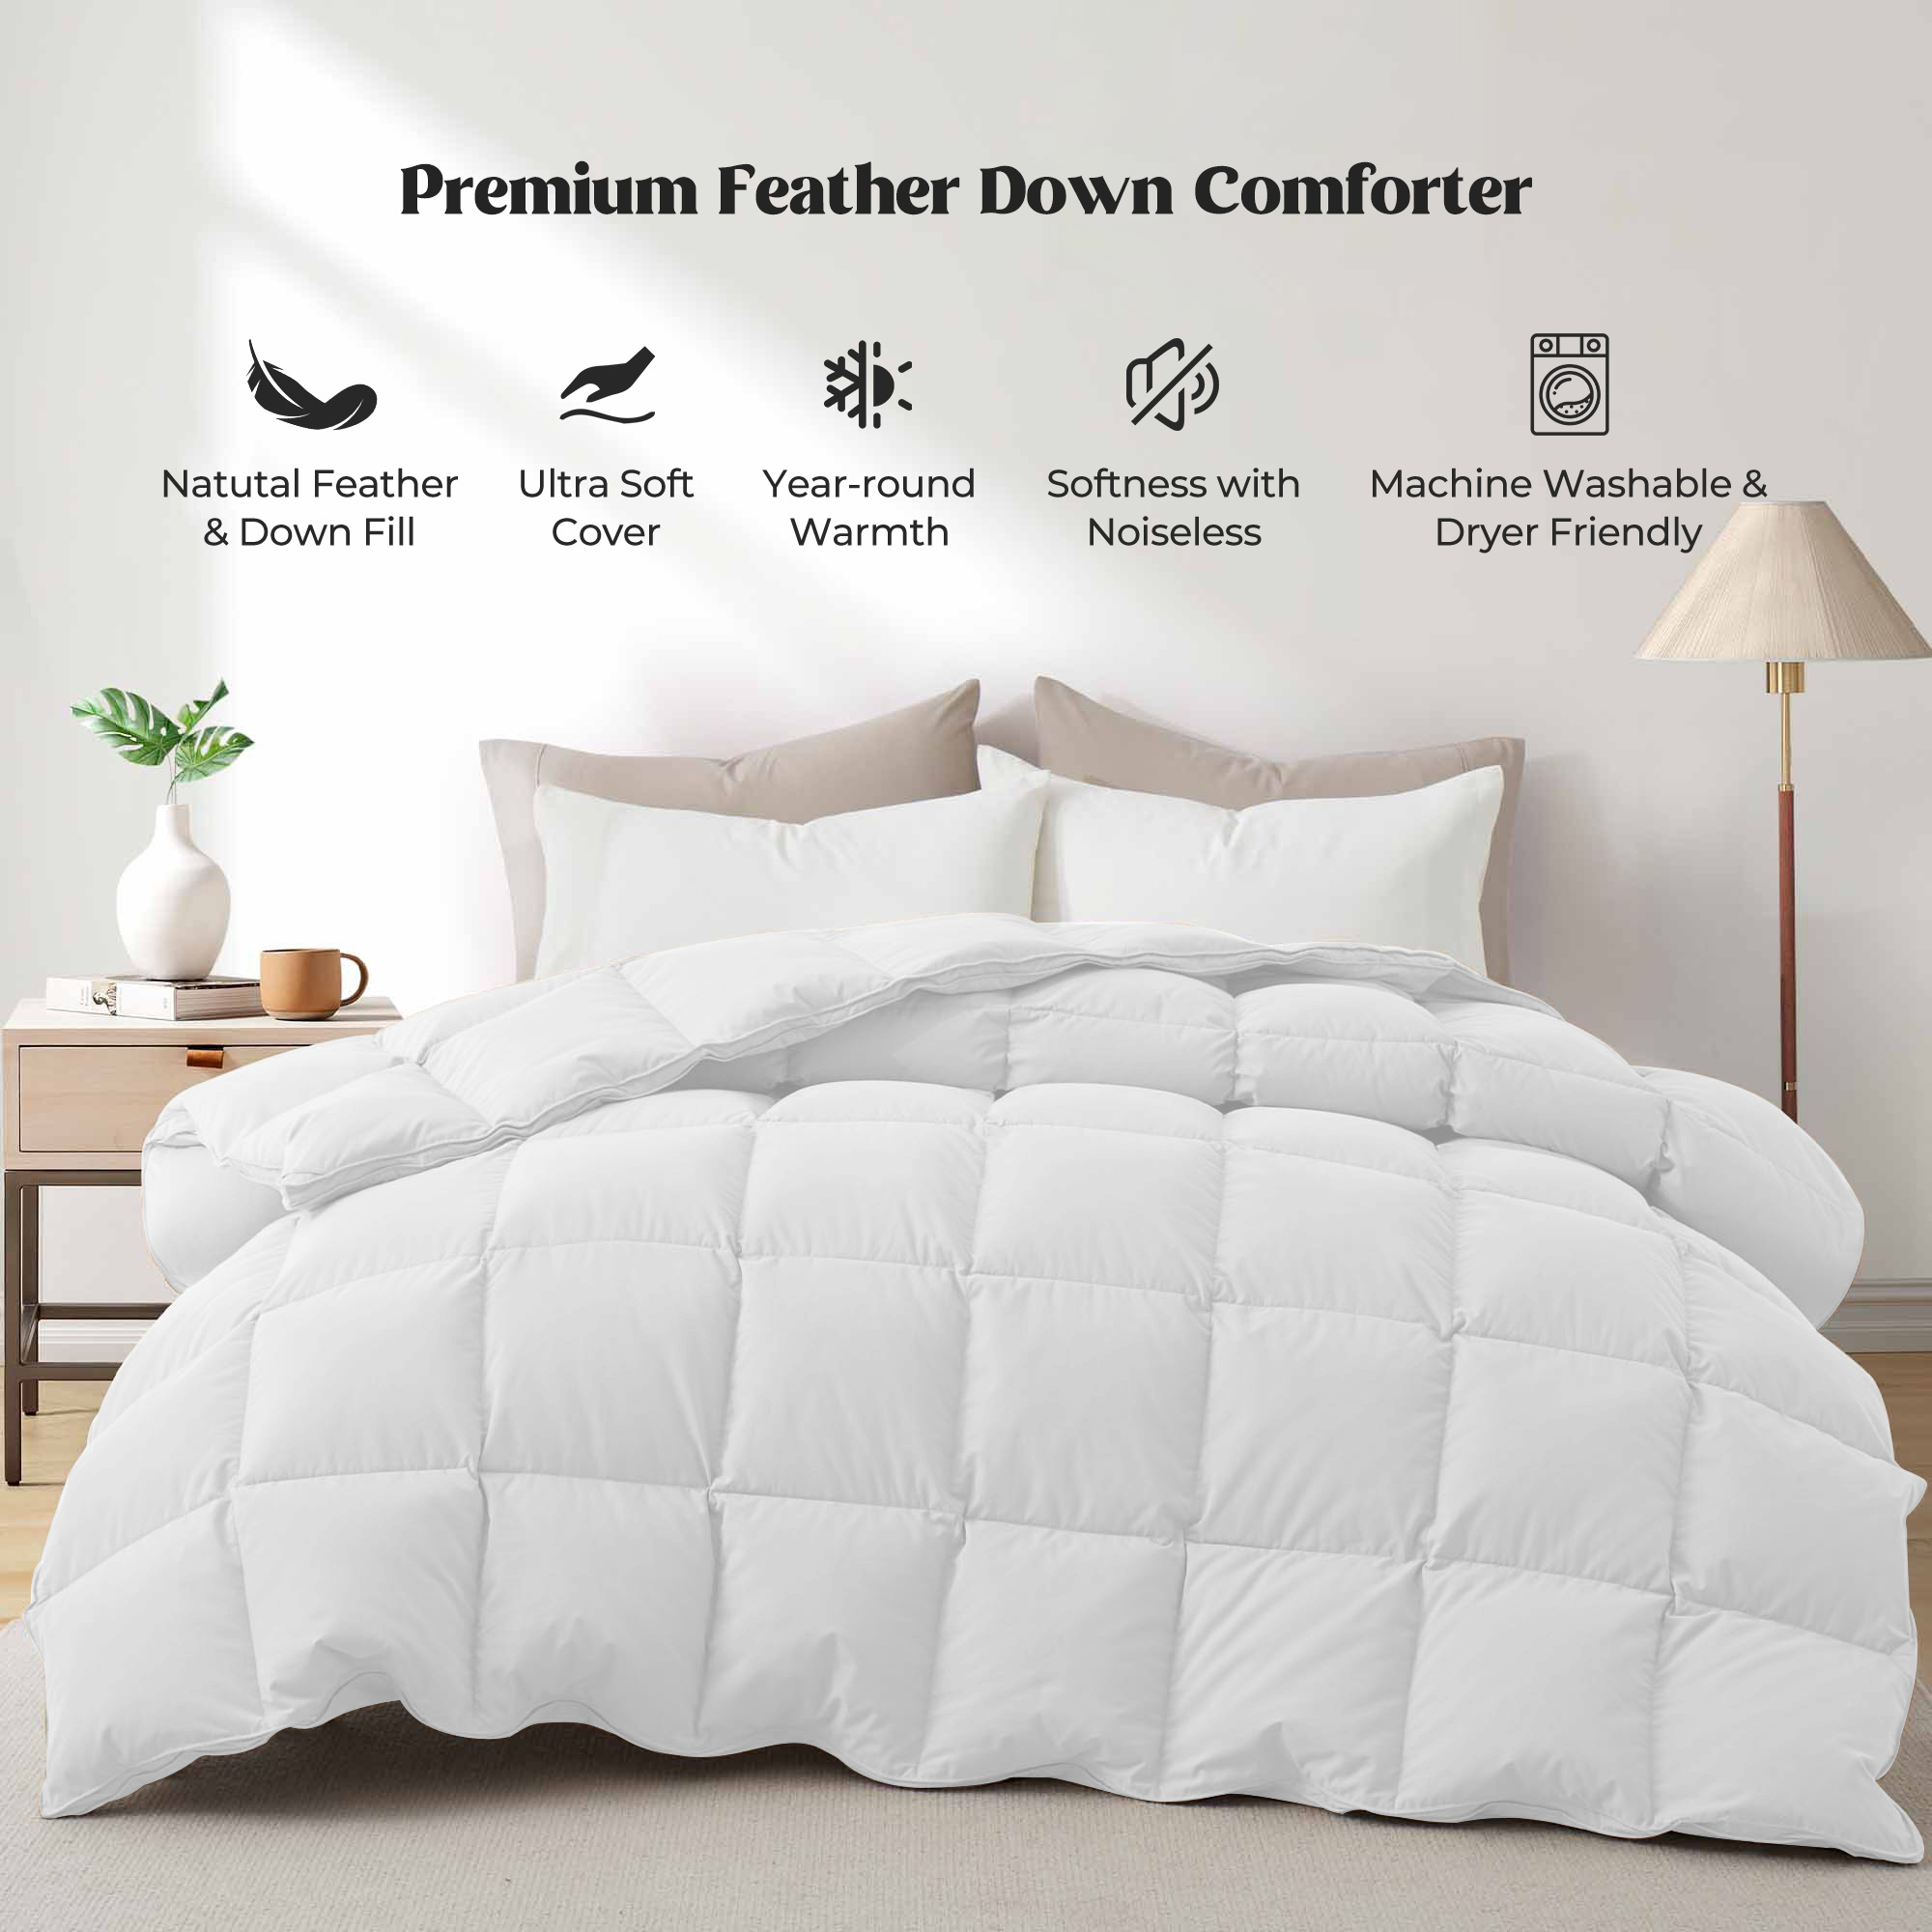 Medium Weight Goose Feather And Down Comforter - White, Full/Queen